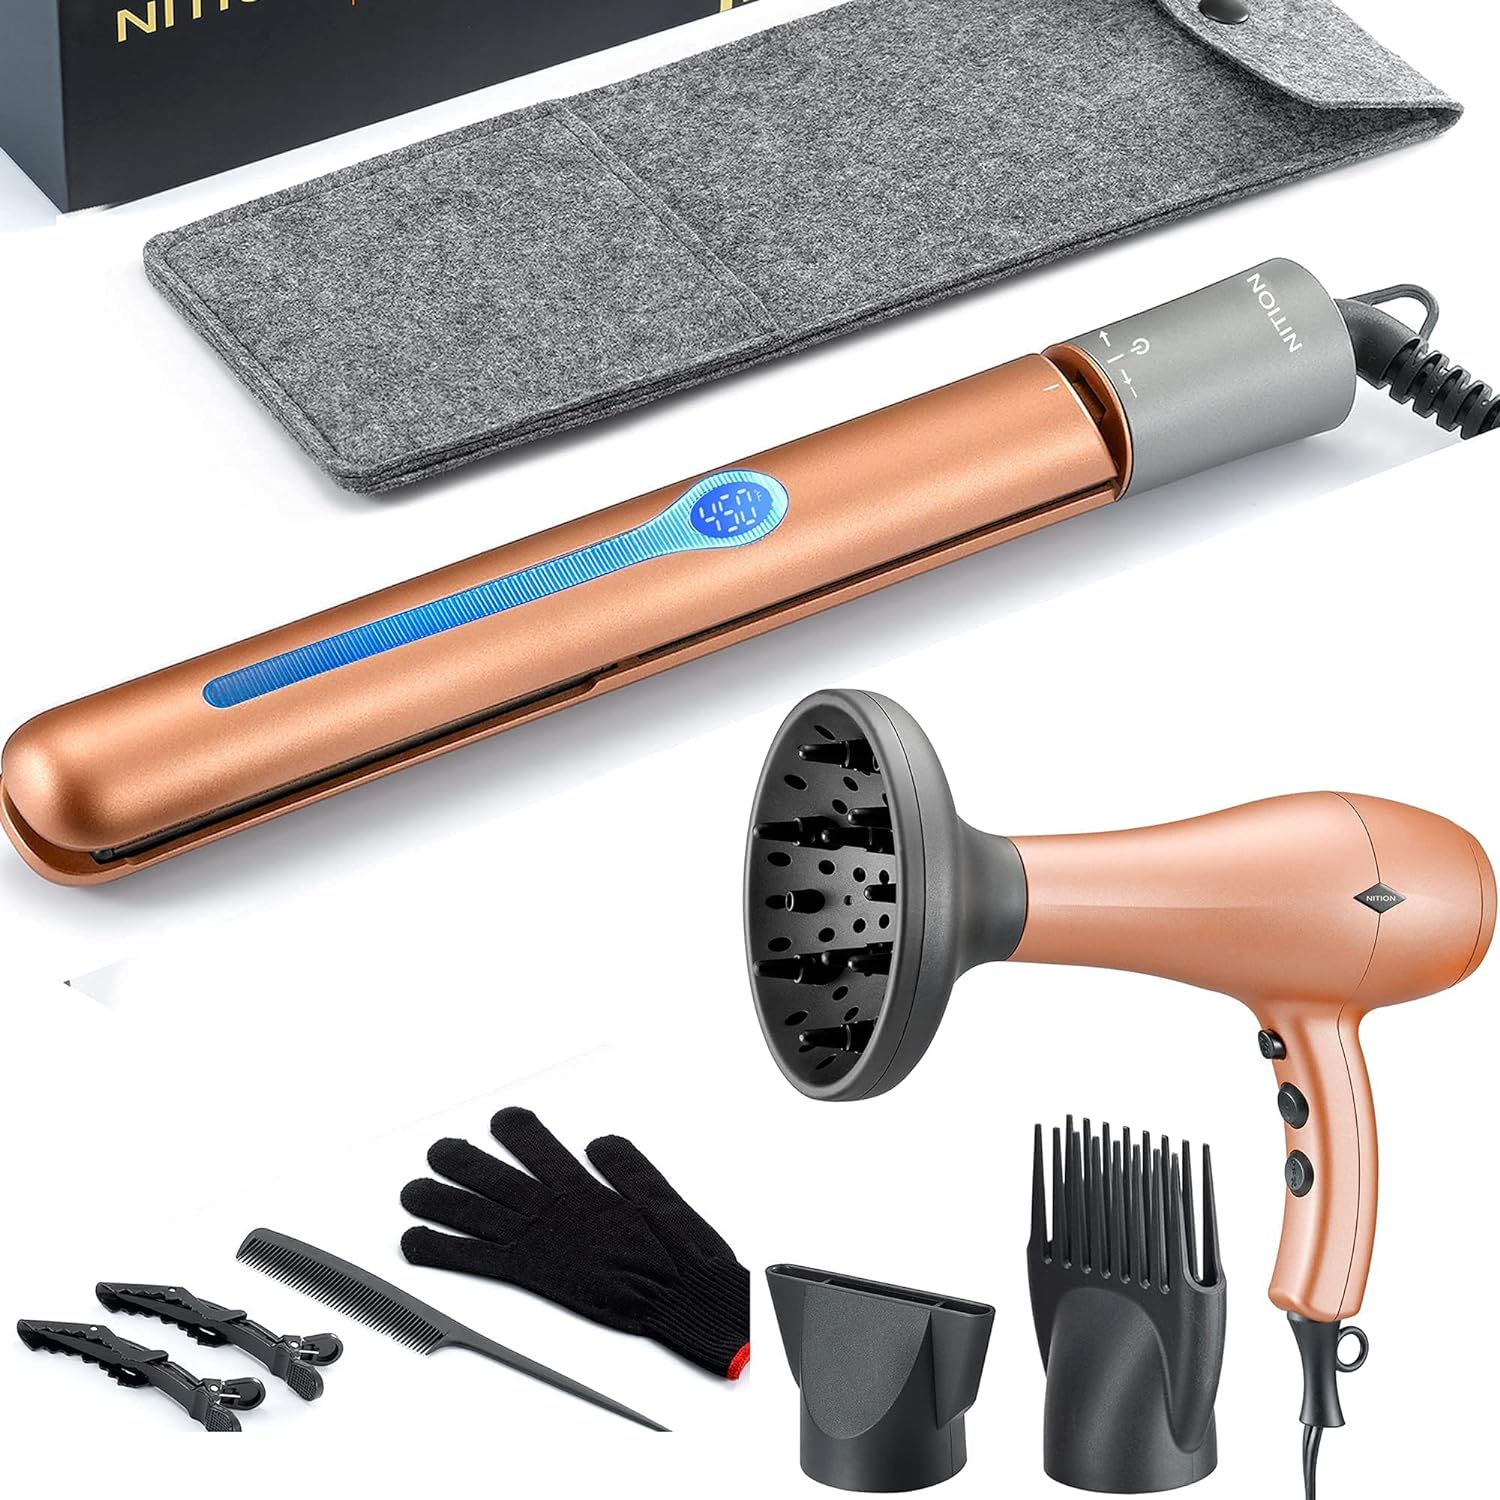 NITION Pro Salon Hair Flat Iron Styling Tools Hair Straightener and Hair Dryer with Diffuser/Comb Set